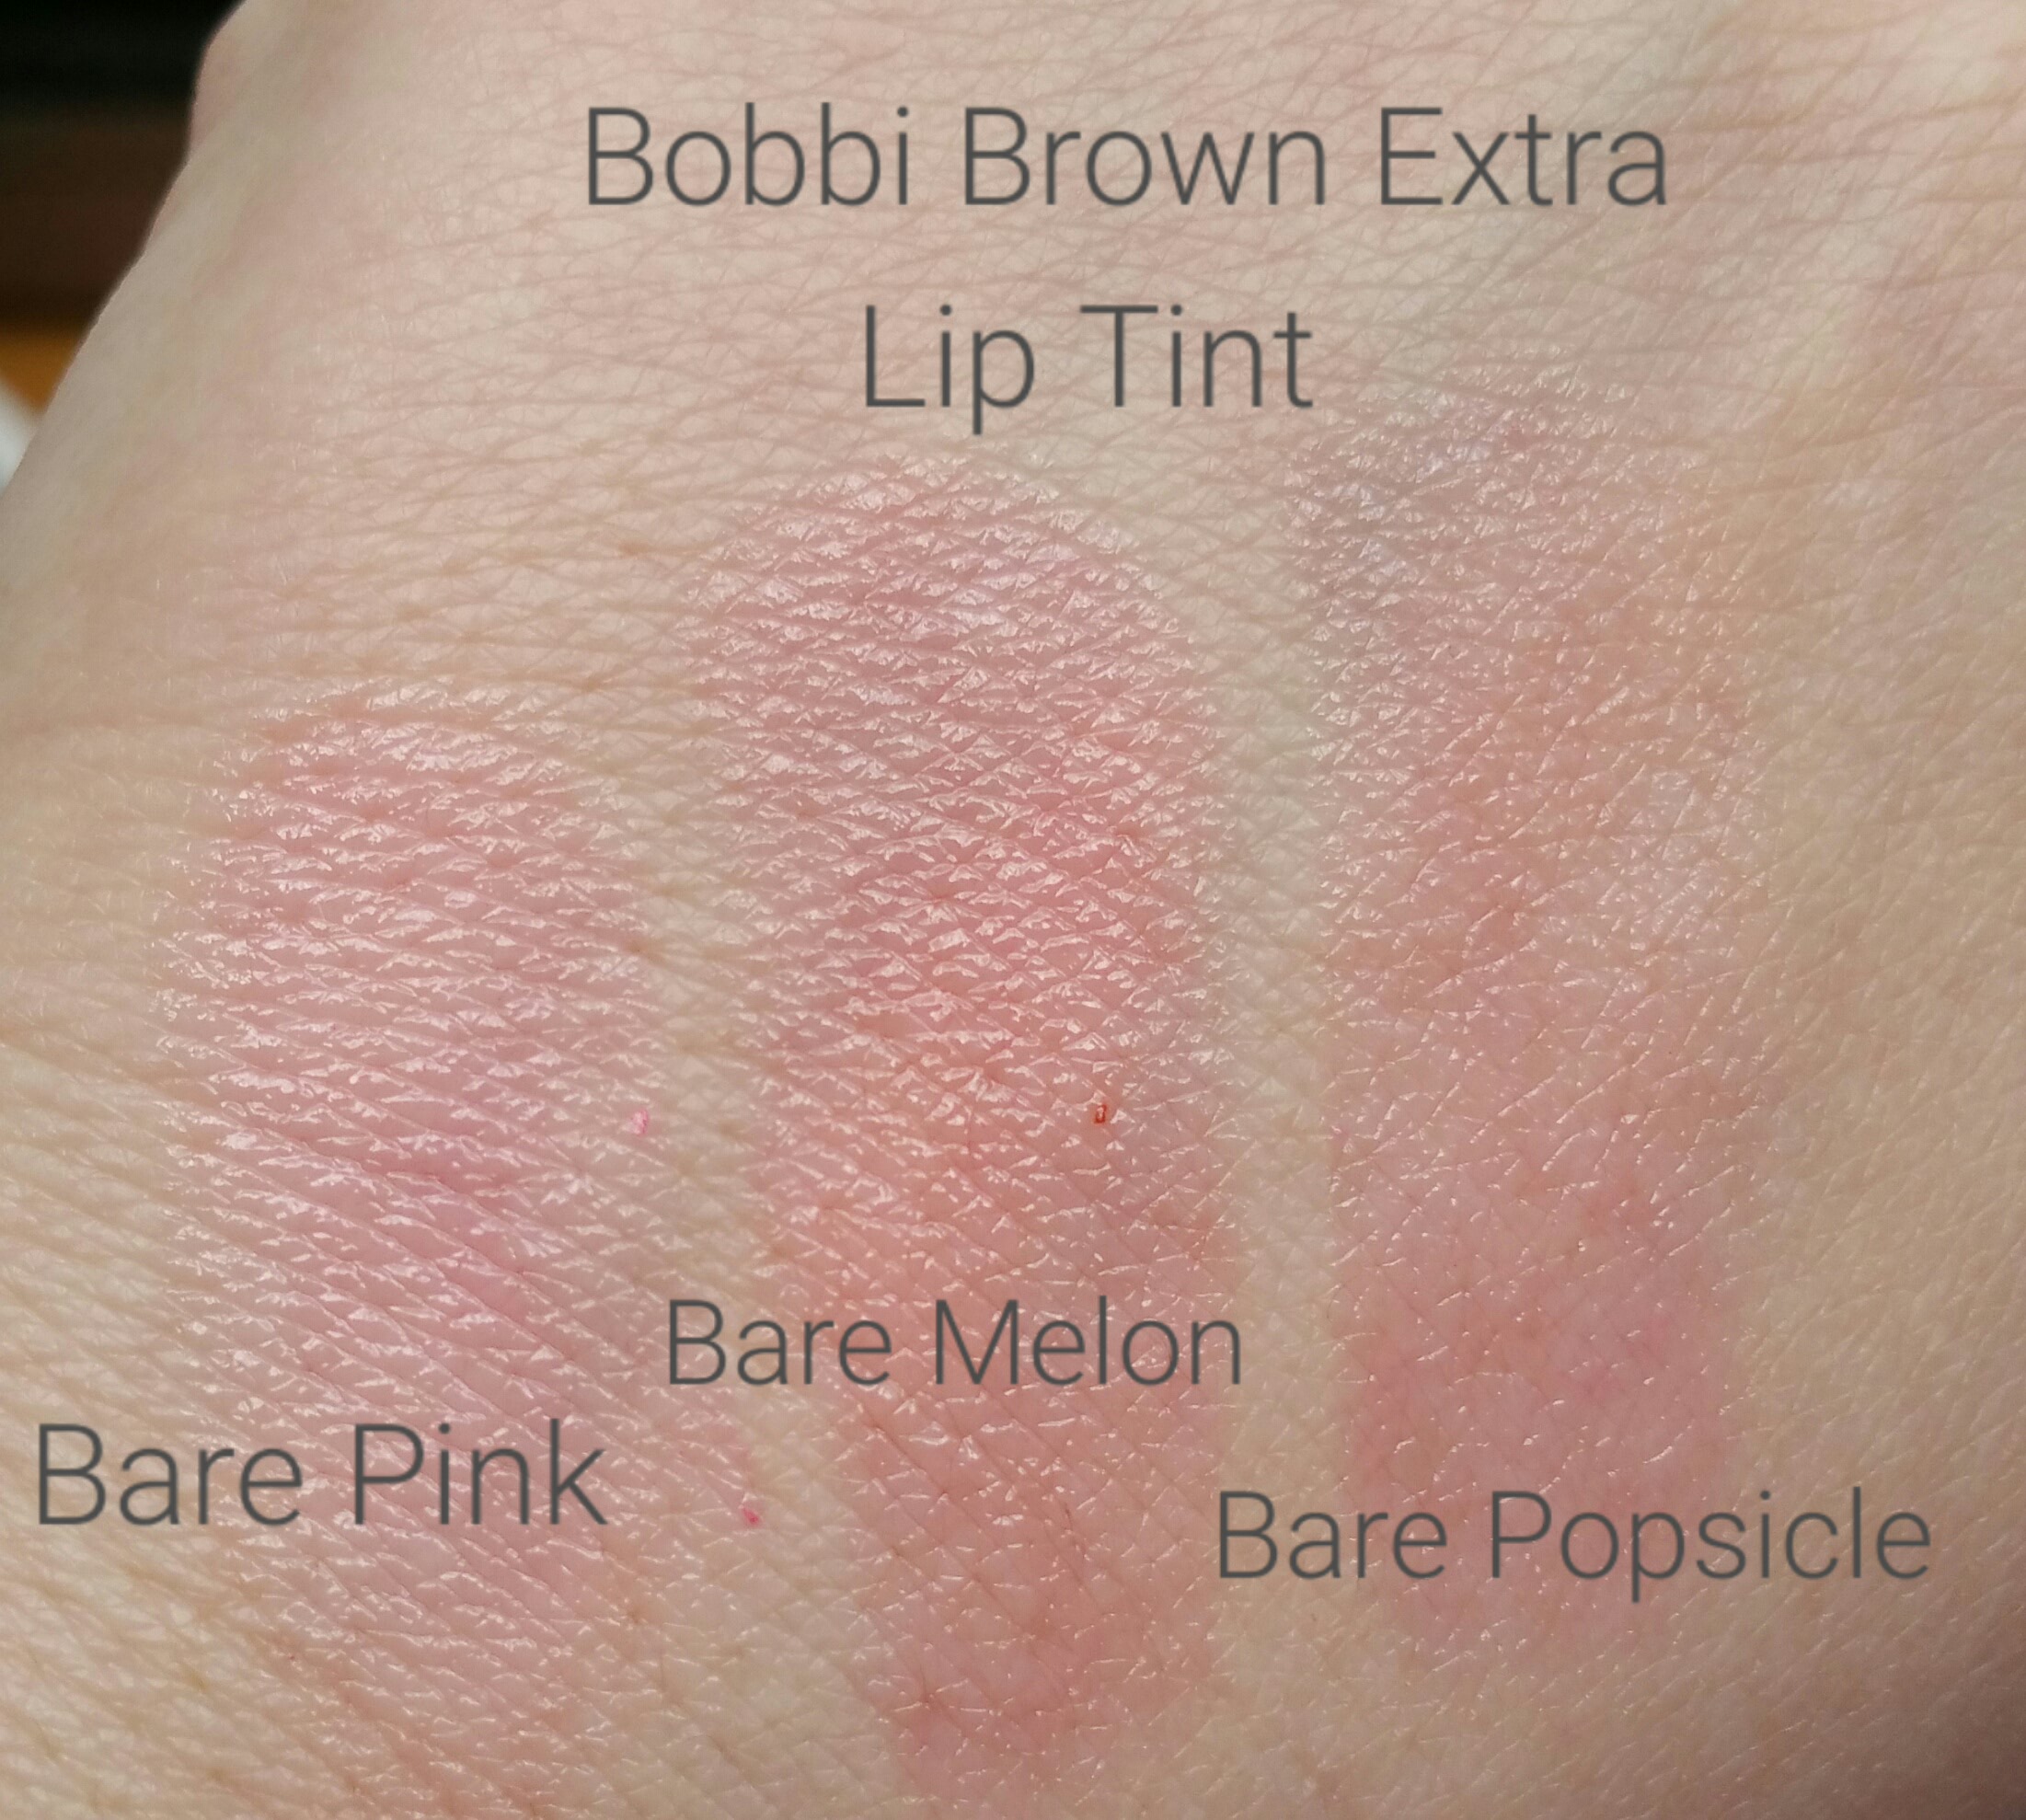 Bobbi Brown's Extra Lip Tint in 2 NEW shades! L to R: Bare Pink, Bare Melon, and Bare Popsicle.